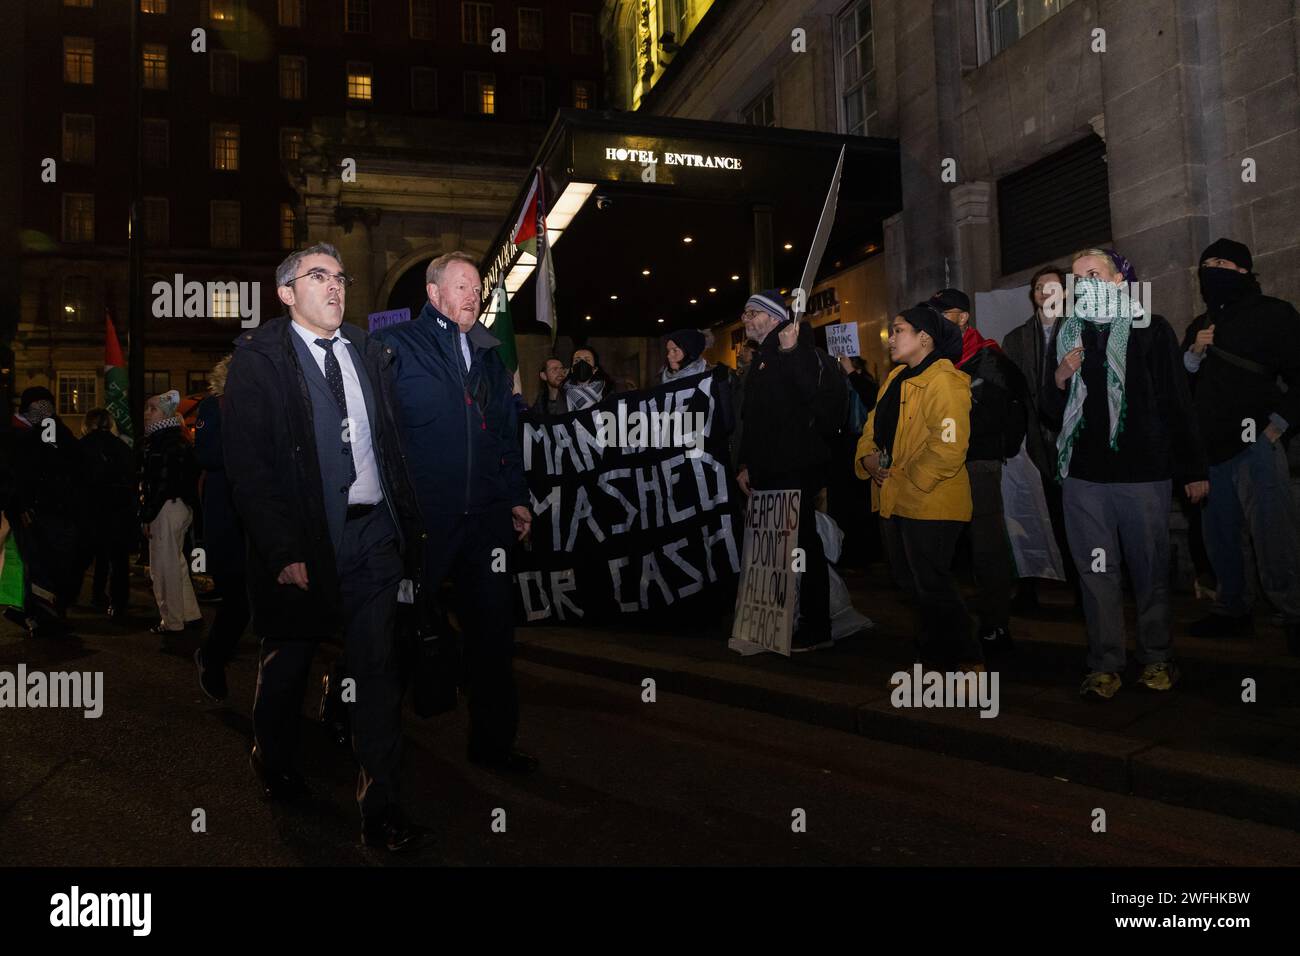 London, UK. 30th January, 2024. Guests arriving at the JW Marriott Grosvenor House Hotel for the ADS Annual Dinner encounter a protest by campaigners against the arms trade. The ADS Annual Dinner brings together representatives of companies from the UK's aerospace, defence, security and space industries. Sponsors of the event include BAE Systems which supplies components for F-35 combat aircraft used by Israel during its invasion of Gaza. Credit: Mark Kerrison/Alamy Live News Stock Photo